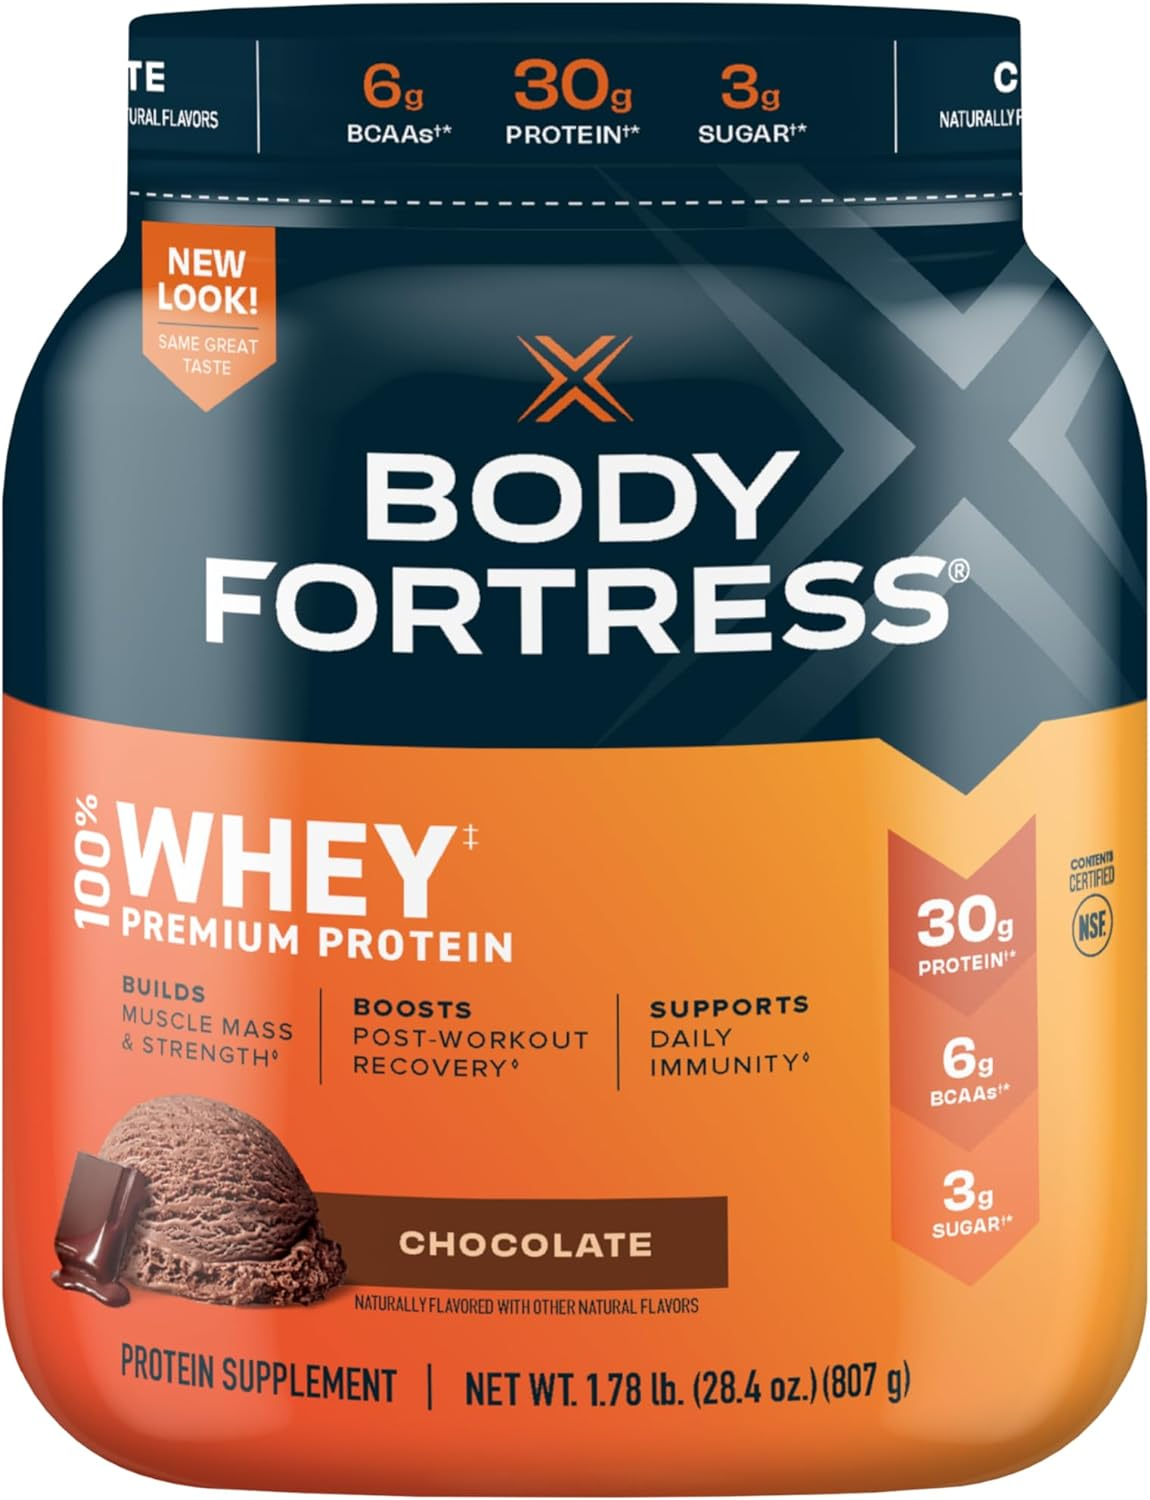 Body Fortress 100% Whey, Premium Protein Powder, Chocolate, 1.78lbs (Packaging May Vary) : as low as $10.99